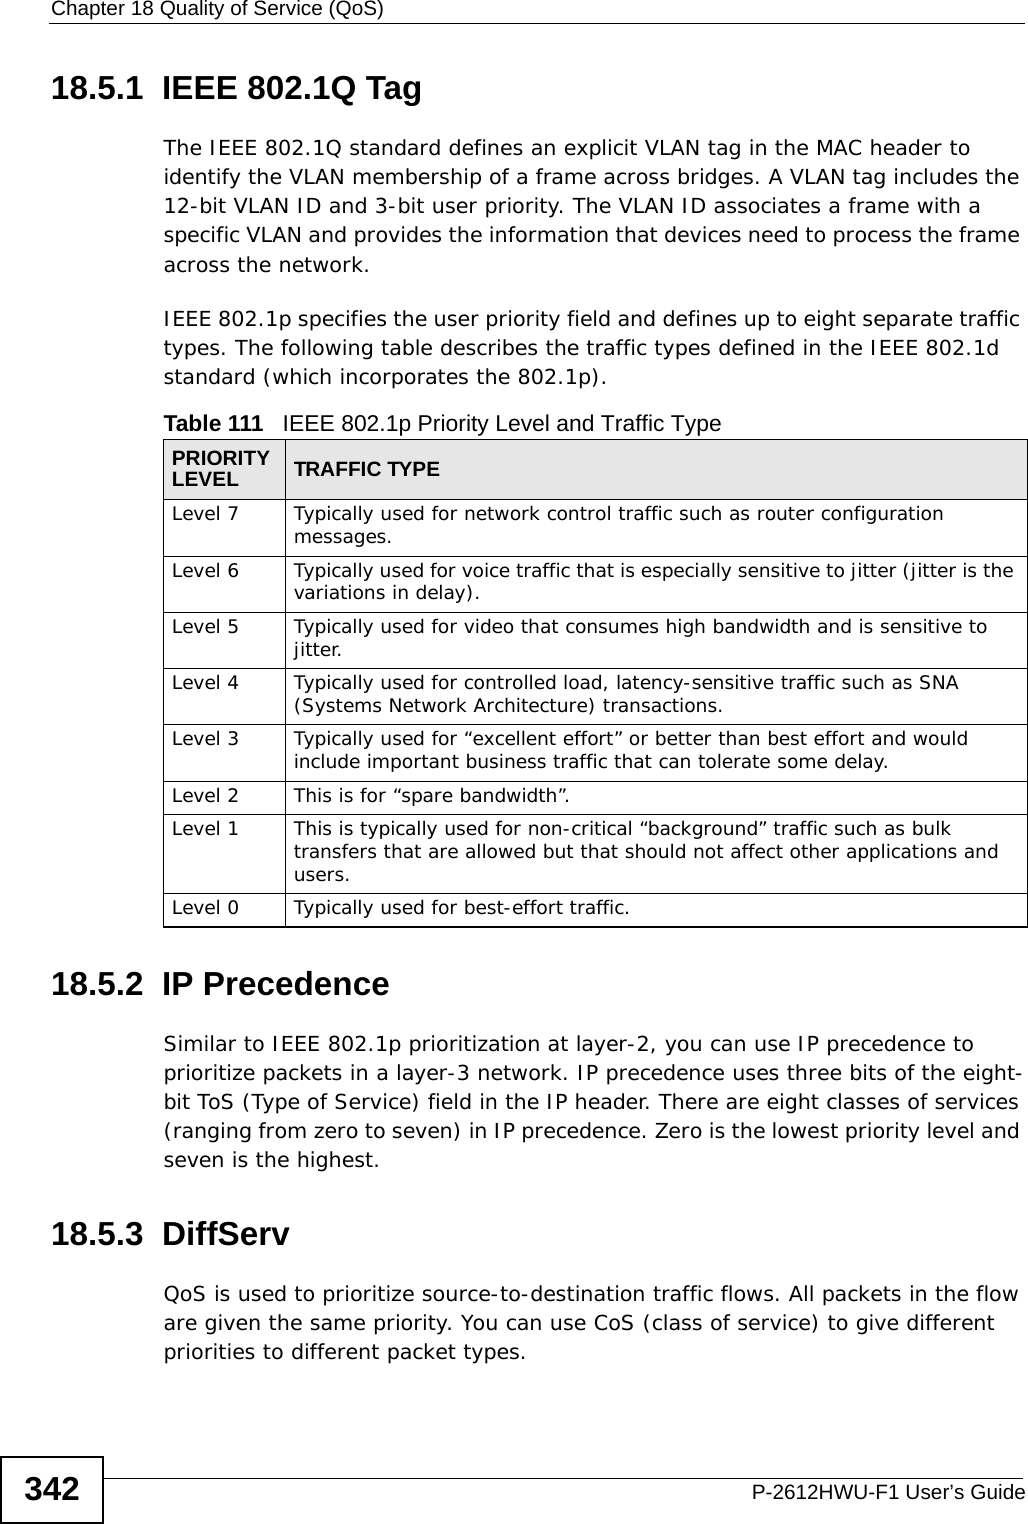 Chapter 18 Quality of Service (QoS)P-2612HWU-F1 User’s Guide34218.5.1  IEEE 802.1Q TagThe IEEE 802.1Q standard defines an explicit VLAN tag in the MAC header to identify the VLAN membership of a frame across bridges. A VLAN tag includes the 12-bit VLAN ID and 3-bit user priority. The VLAN ID associates a frame with a specific VLAN and provides the information that devices need to process the frame across the network. IEEE 802.1p specifies the user priority field and defines up to eight separate traffic types. The following table describes the traffic types defined in the IEEE 802.1d standard (which incorporates the 802.1p). 18.5.2  IP PrecedenceSimilar to IEEE 802.1p prioritization at layer-2, you can use IP precedence to prioritize packets in a layer-3 network. IP precedence uses three bits of the eight-bit ToS (Type of Service) field in the IP header. There are eight classes of services (ranging from zero to seven) in IP precedence. Zero is the lowest priority level and seven is the highest. 18.5.3  DiffServ QoS is used to prioritize source-to-destination traffic flows. All packets in the flow are given the same priority. You can use CoS (class of service) to give different priorities to different packet types.Table 111   IEEE 802.1p Priority Level and Traffic TypePRIORITY LEVEL TRAFFIC TYPELevel 7 Typically used for network control traffic such as router configuration messages.Level 6 Typically used for voice traffic that is especially sensitive to jitter (jitter is the variations in delay).Level 5 Typically used for video that consumes high bandwidth and is sensitive to jitter.Level 4 Typically used for controlled load, latency-sensitive traffic such as SNA (Systems Network Architecture) transactions.Level 3 Typically used for “excellent effort” or better than best effort and would include important business traffic that can tolerate some delay.Level 2 This is for “spare bandwidth”. Level 1 This is typically used for non-critical “background” traffic such as bulk transfers that are allowed but that should not affect other applications and users. Level 0 Typically used for best-effort traffic.